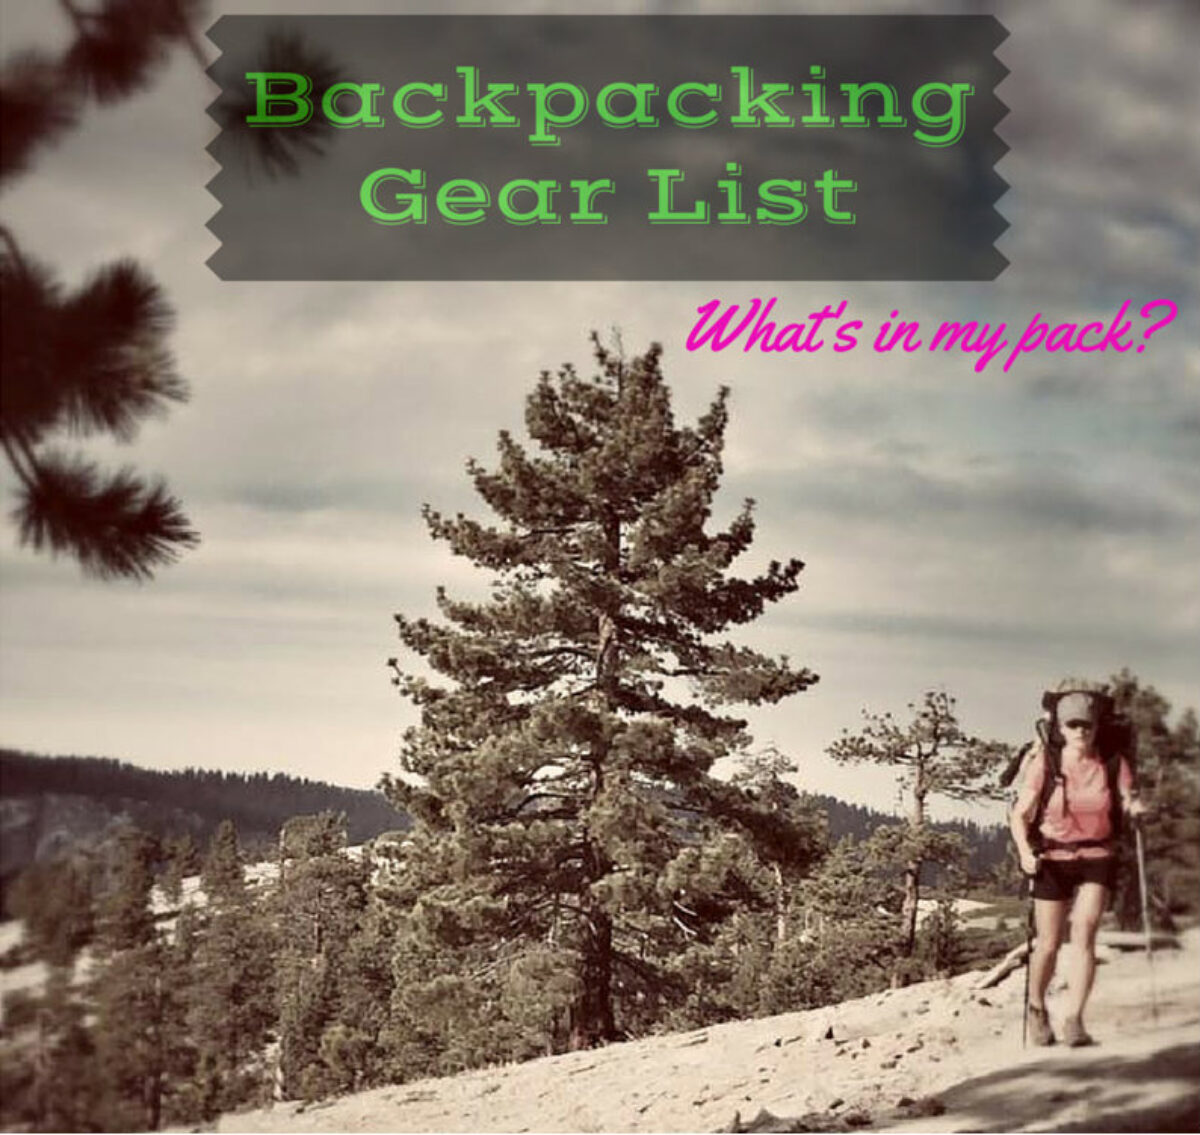 Women's Backpacking Gear Built to Go the Distance